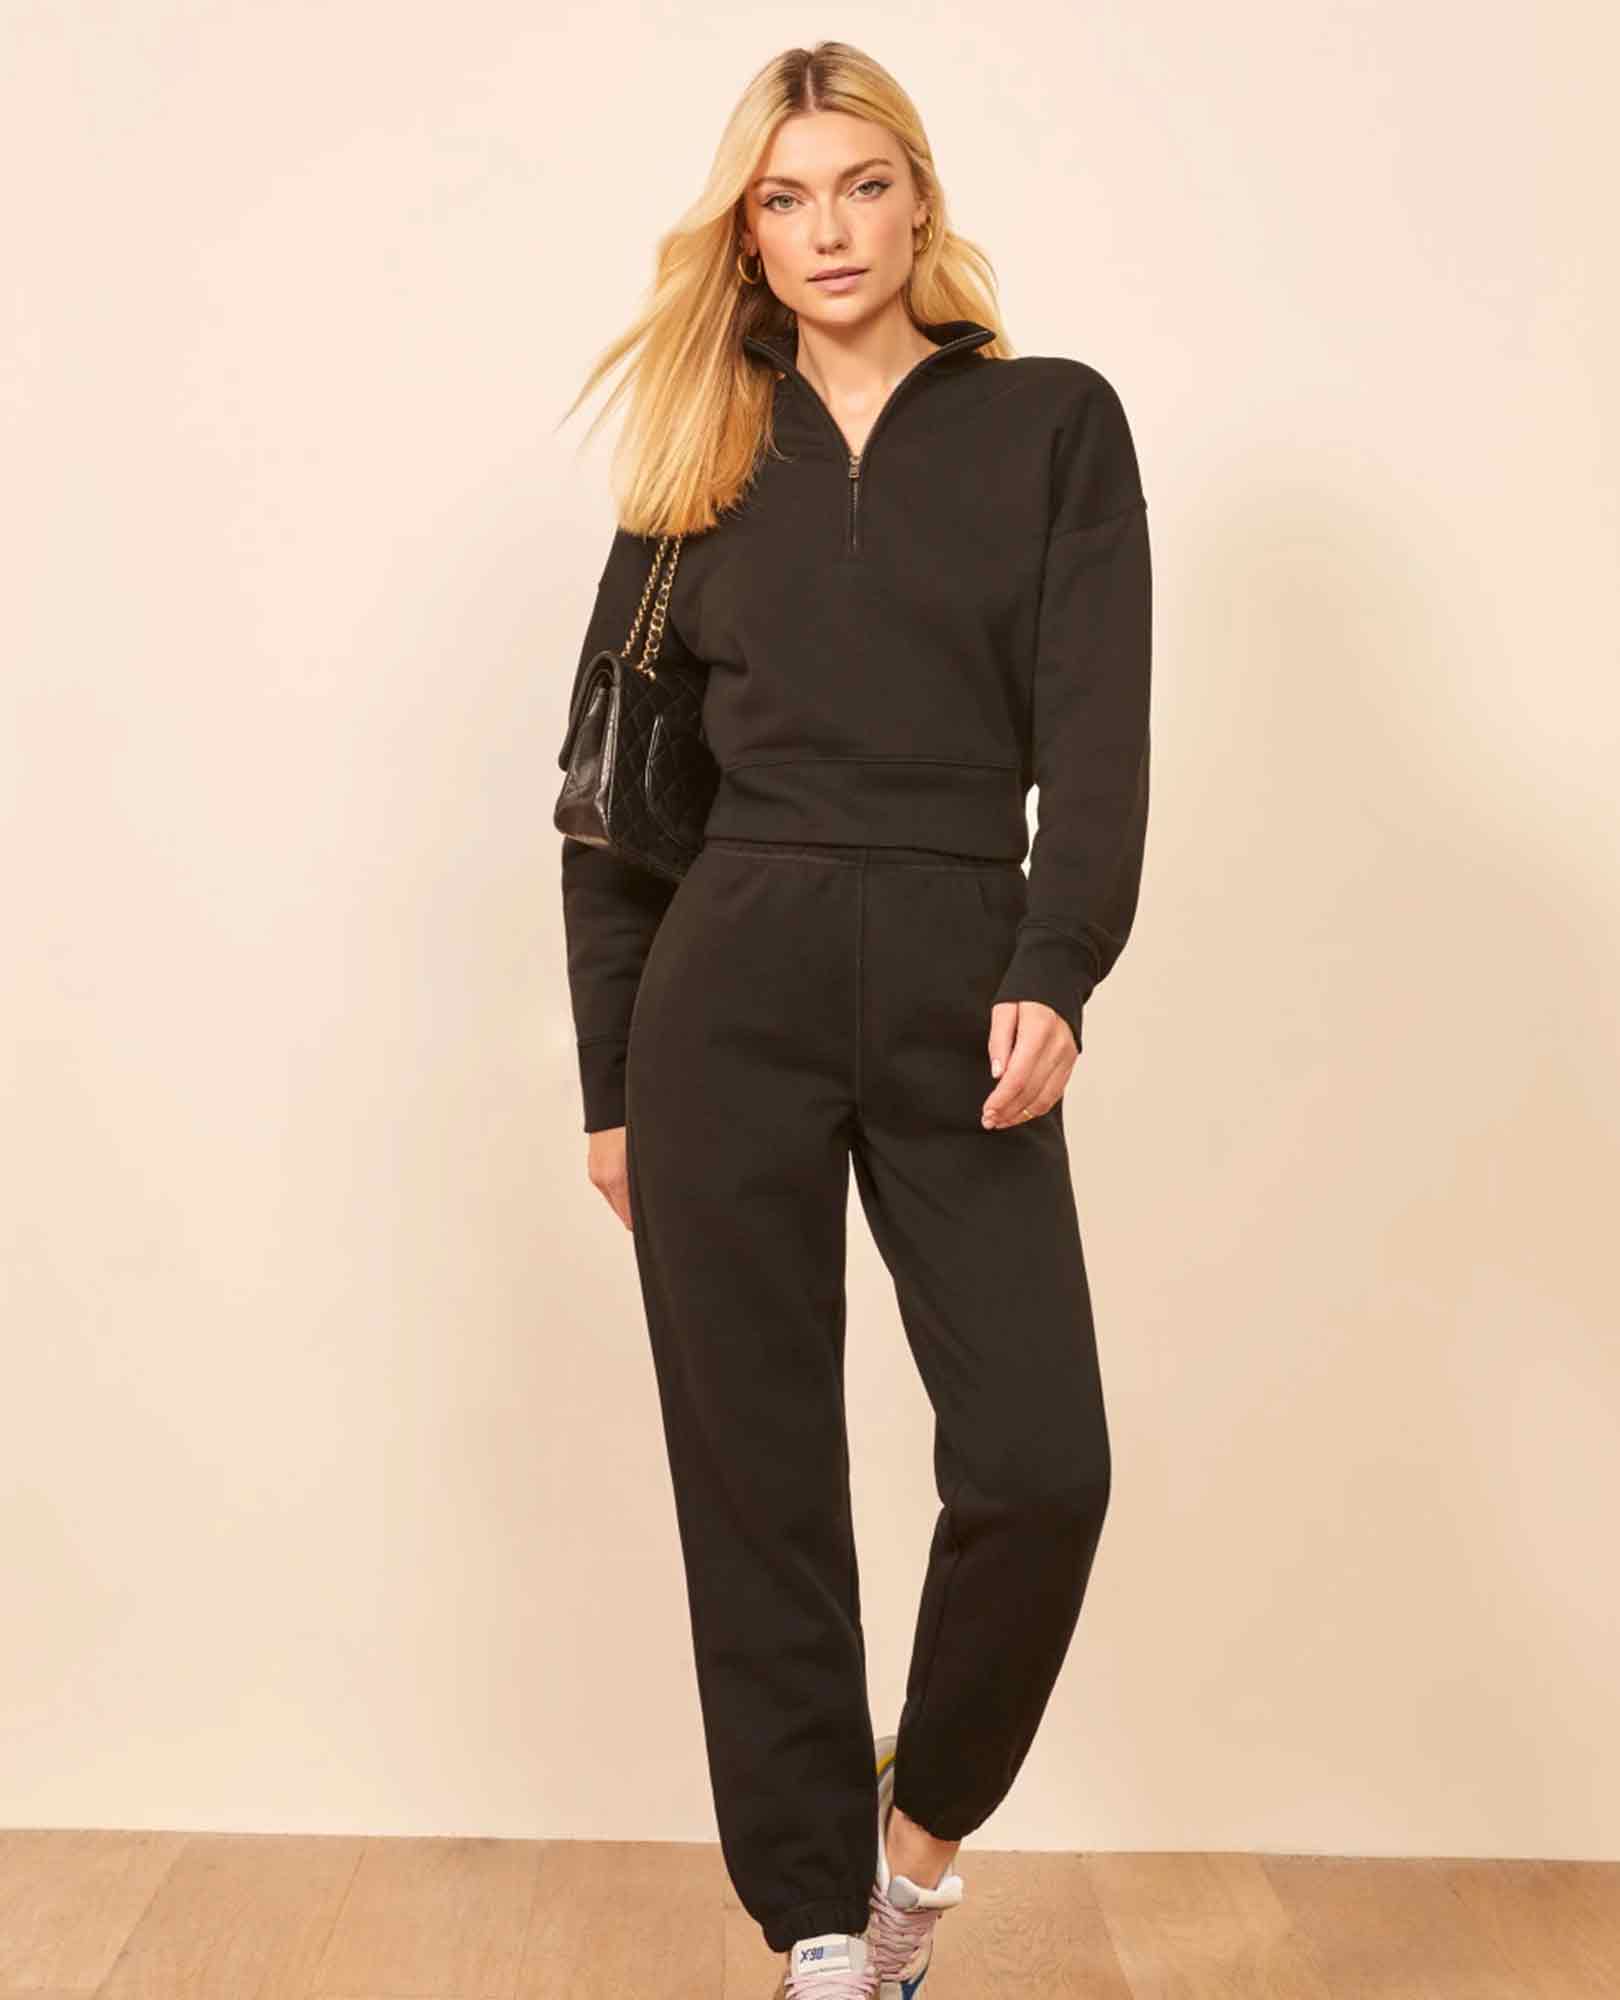 hip-length pullover. With its cozy ribbing at the cuff and neck